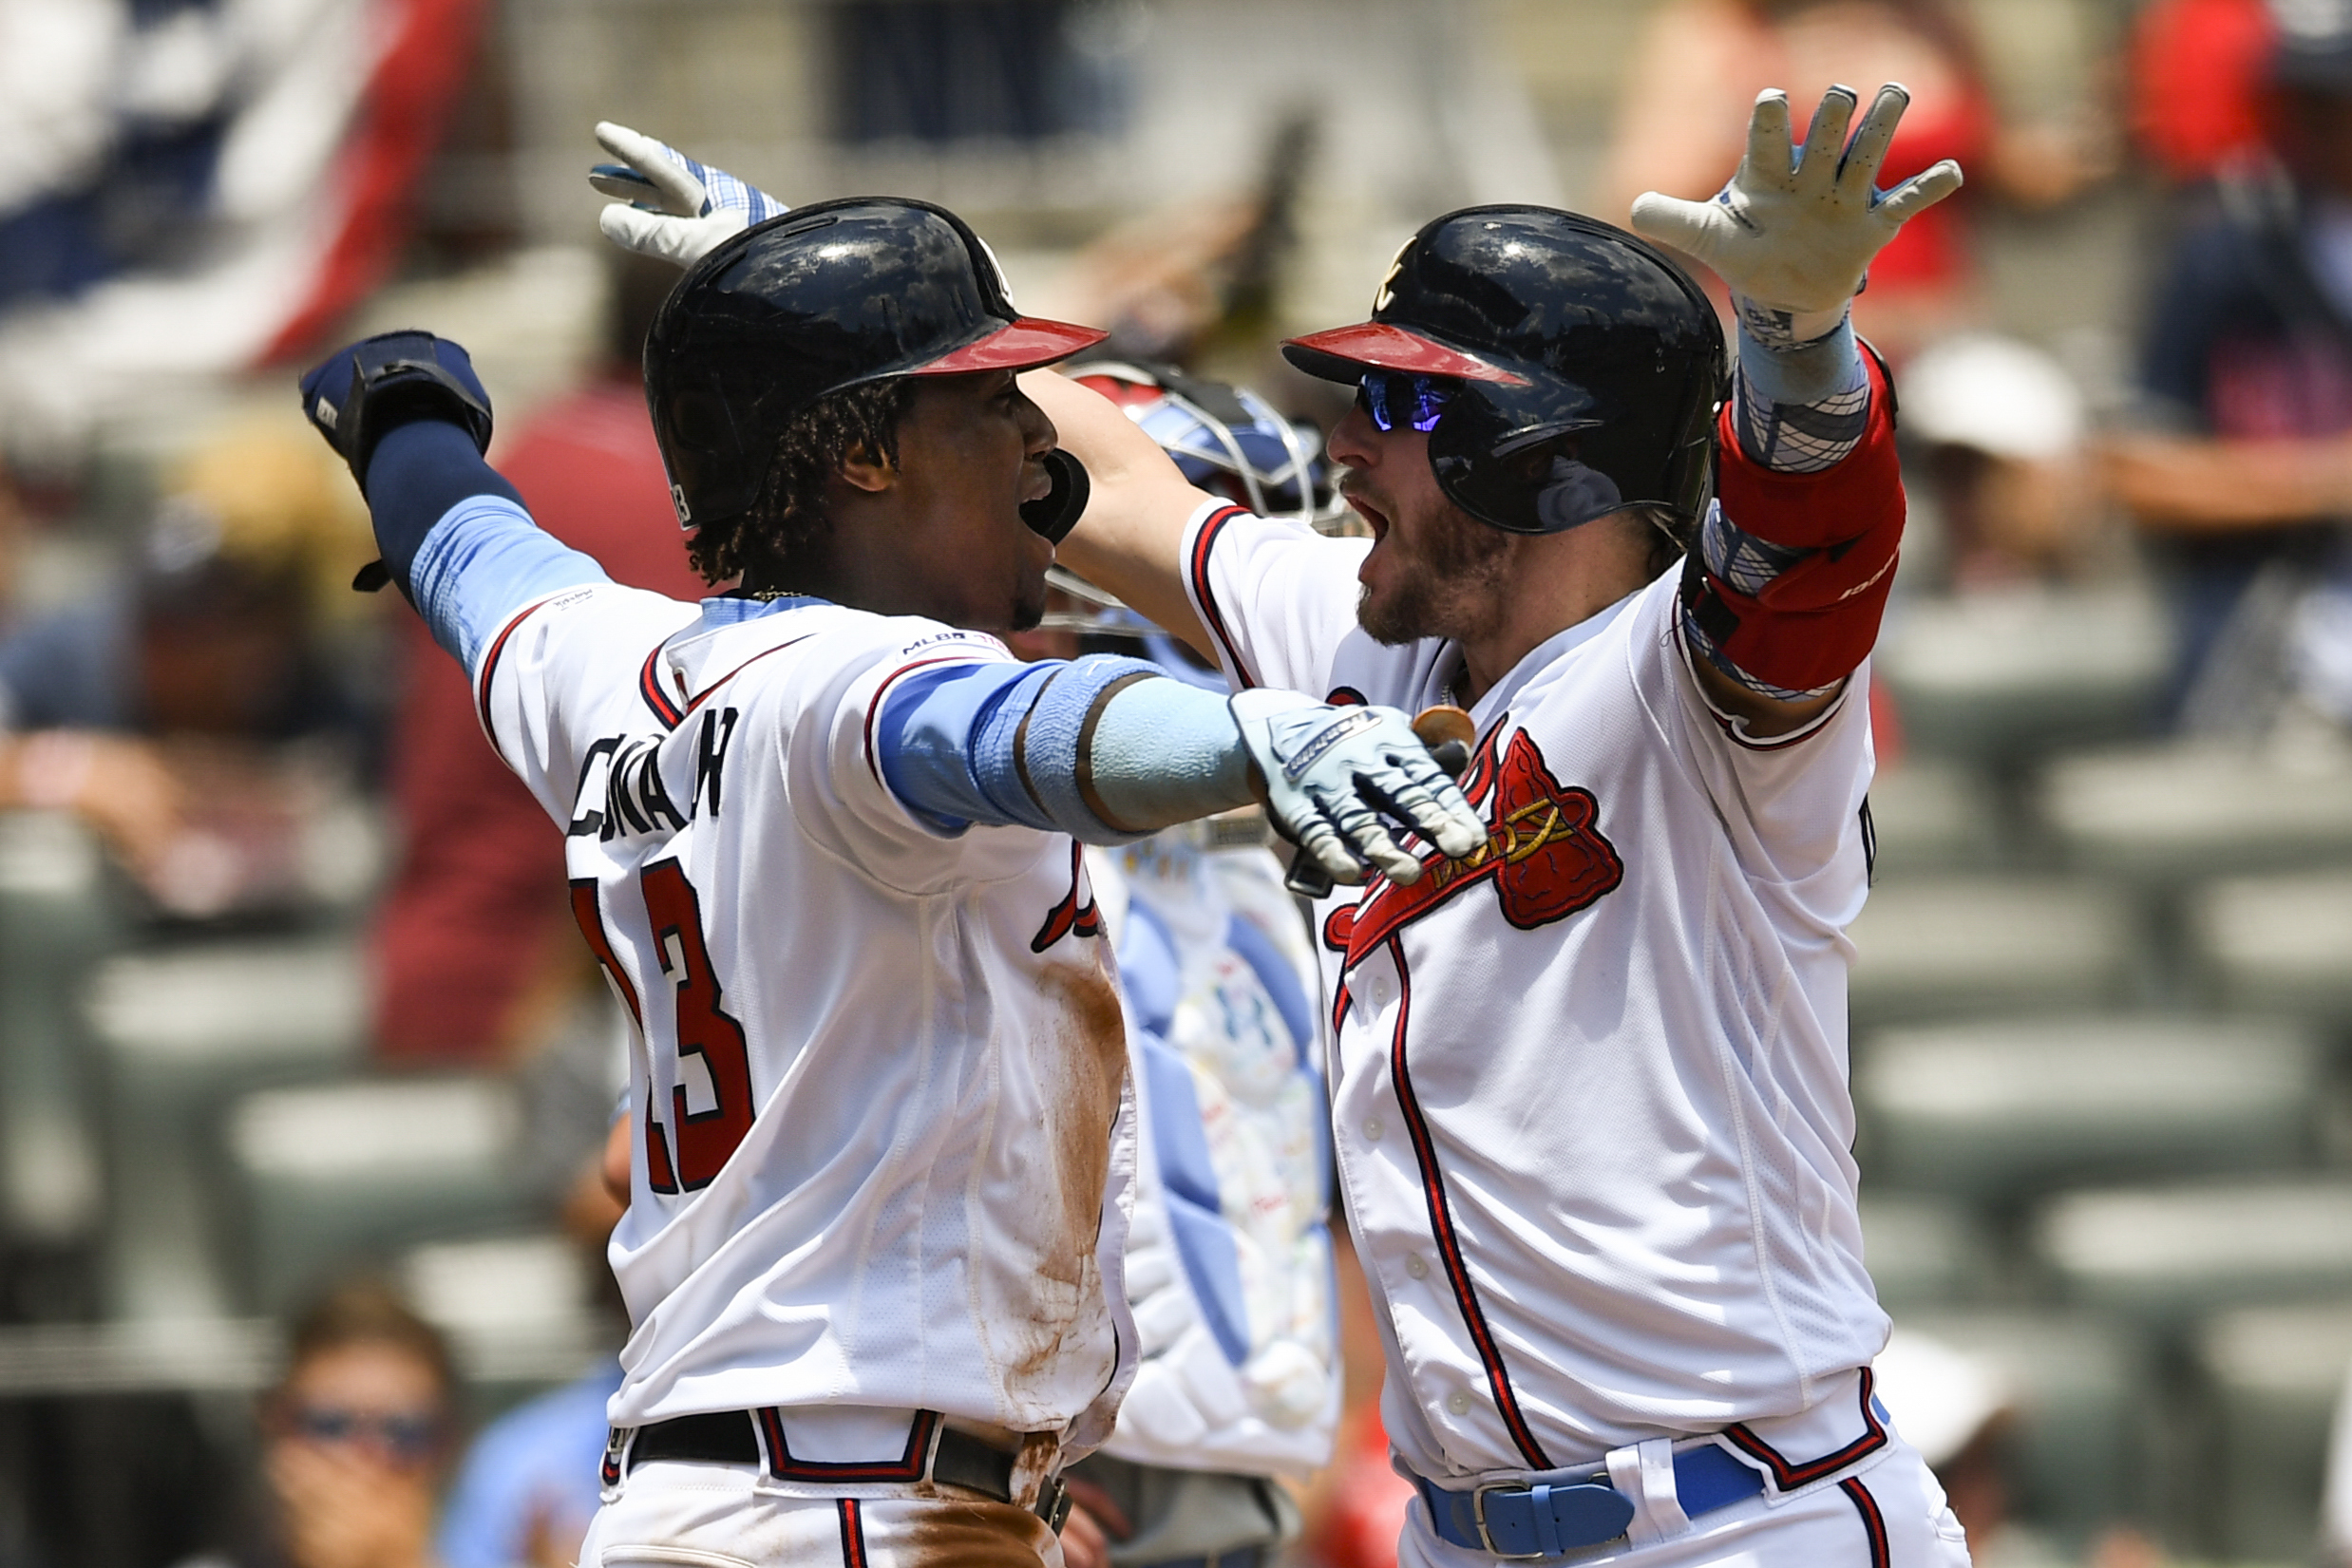 Donaldson stays hot as Braves overwhelm Phillies 15-1